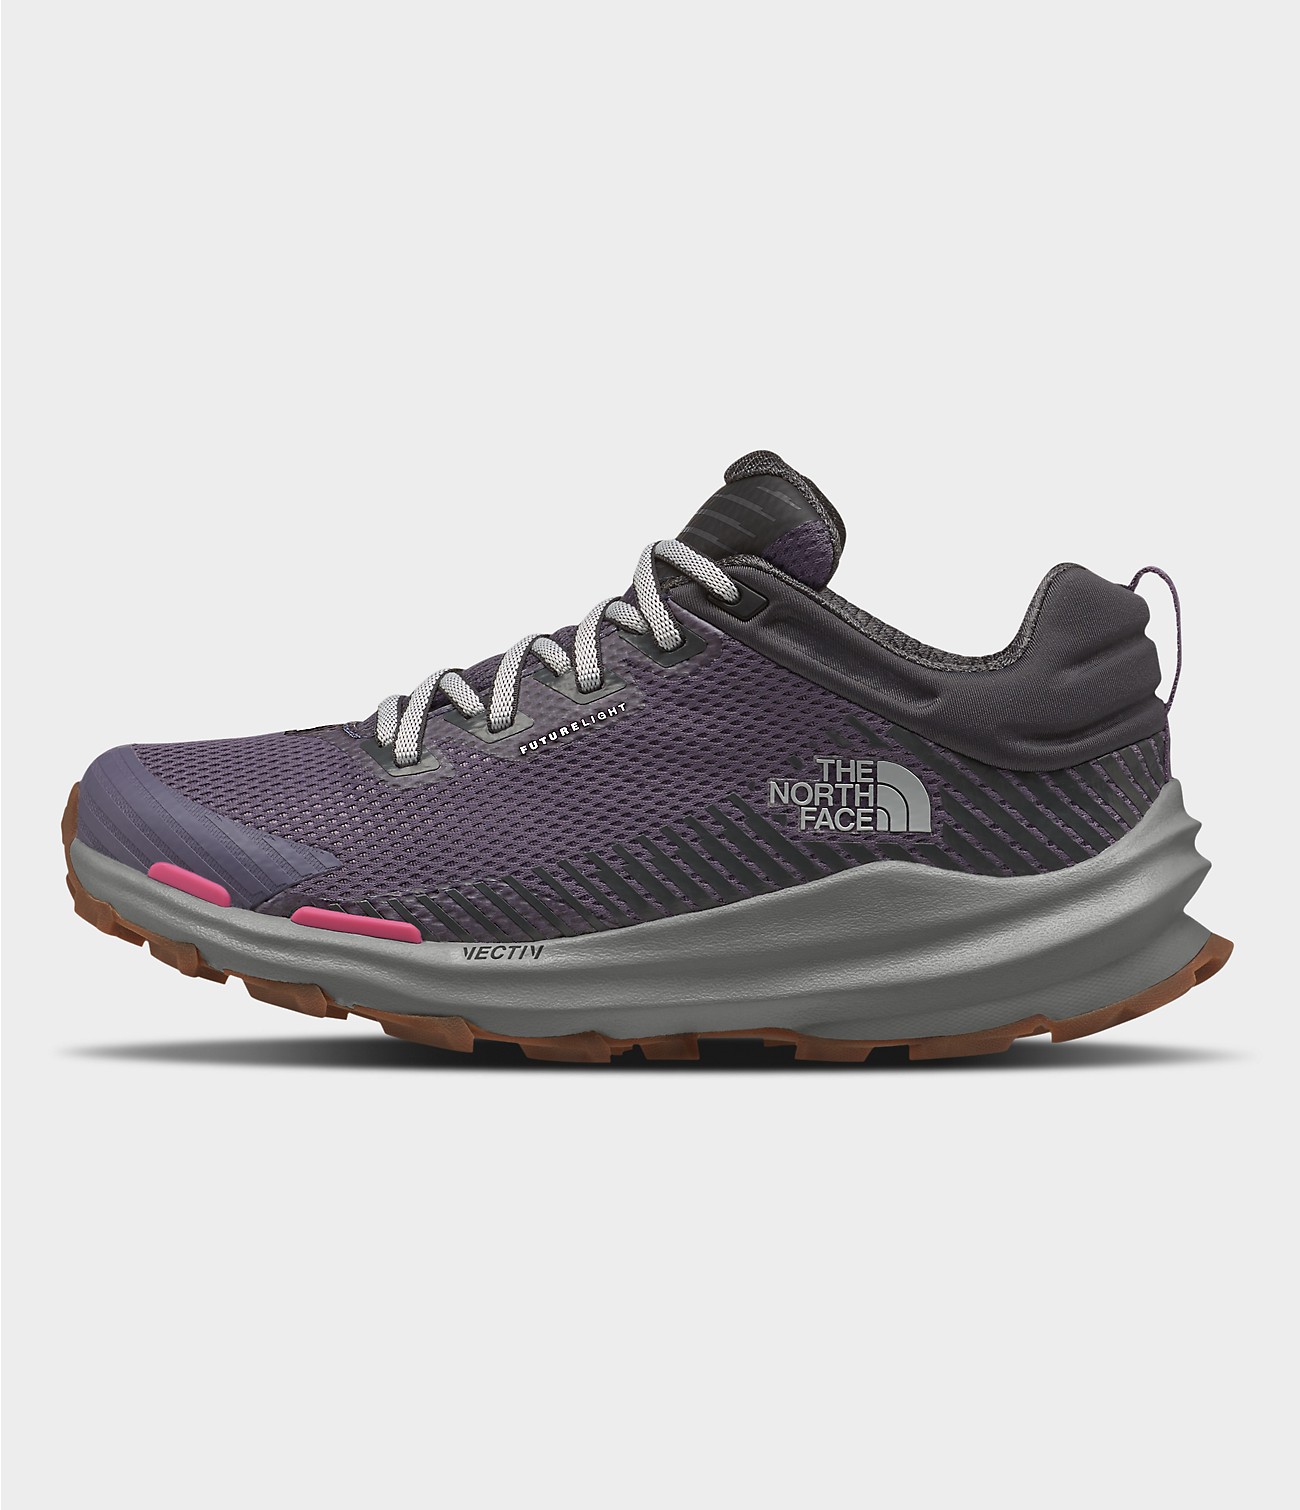 Unlock Wilderness' choice in the Merrell Vs North Face comparison, the VECTIV Fastpack FUTURELIGHT™ Shoes by The North Face